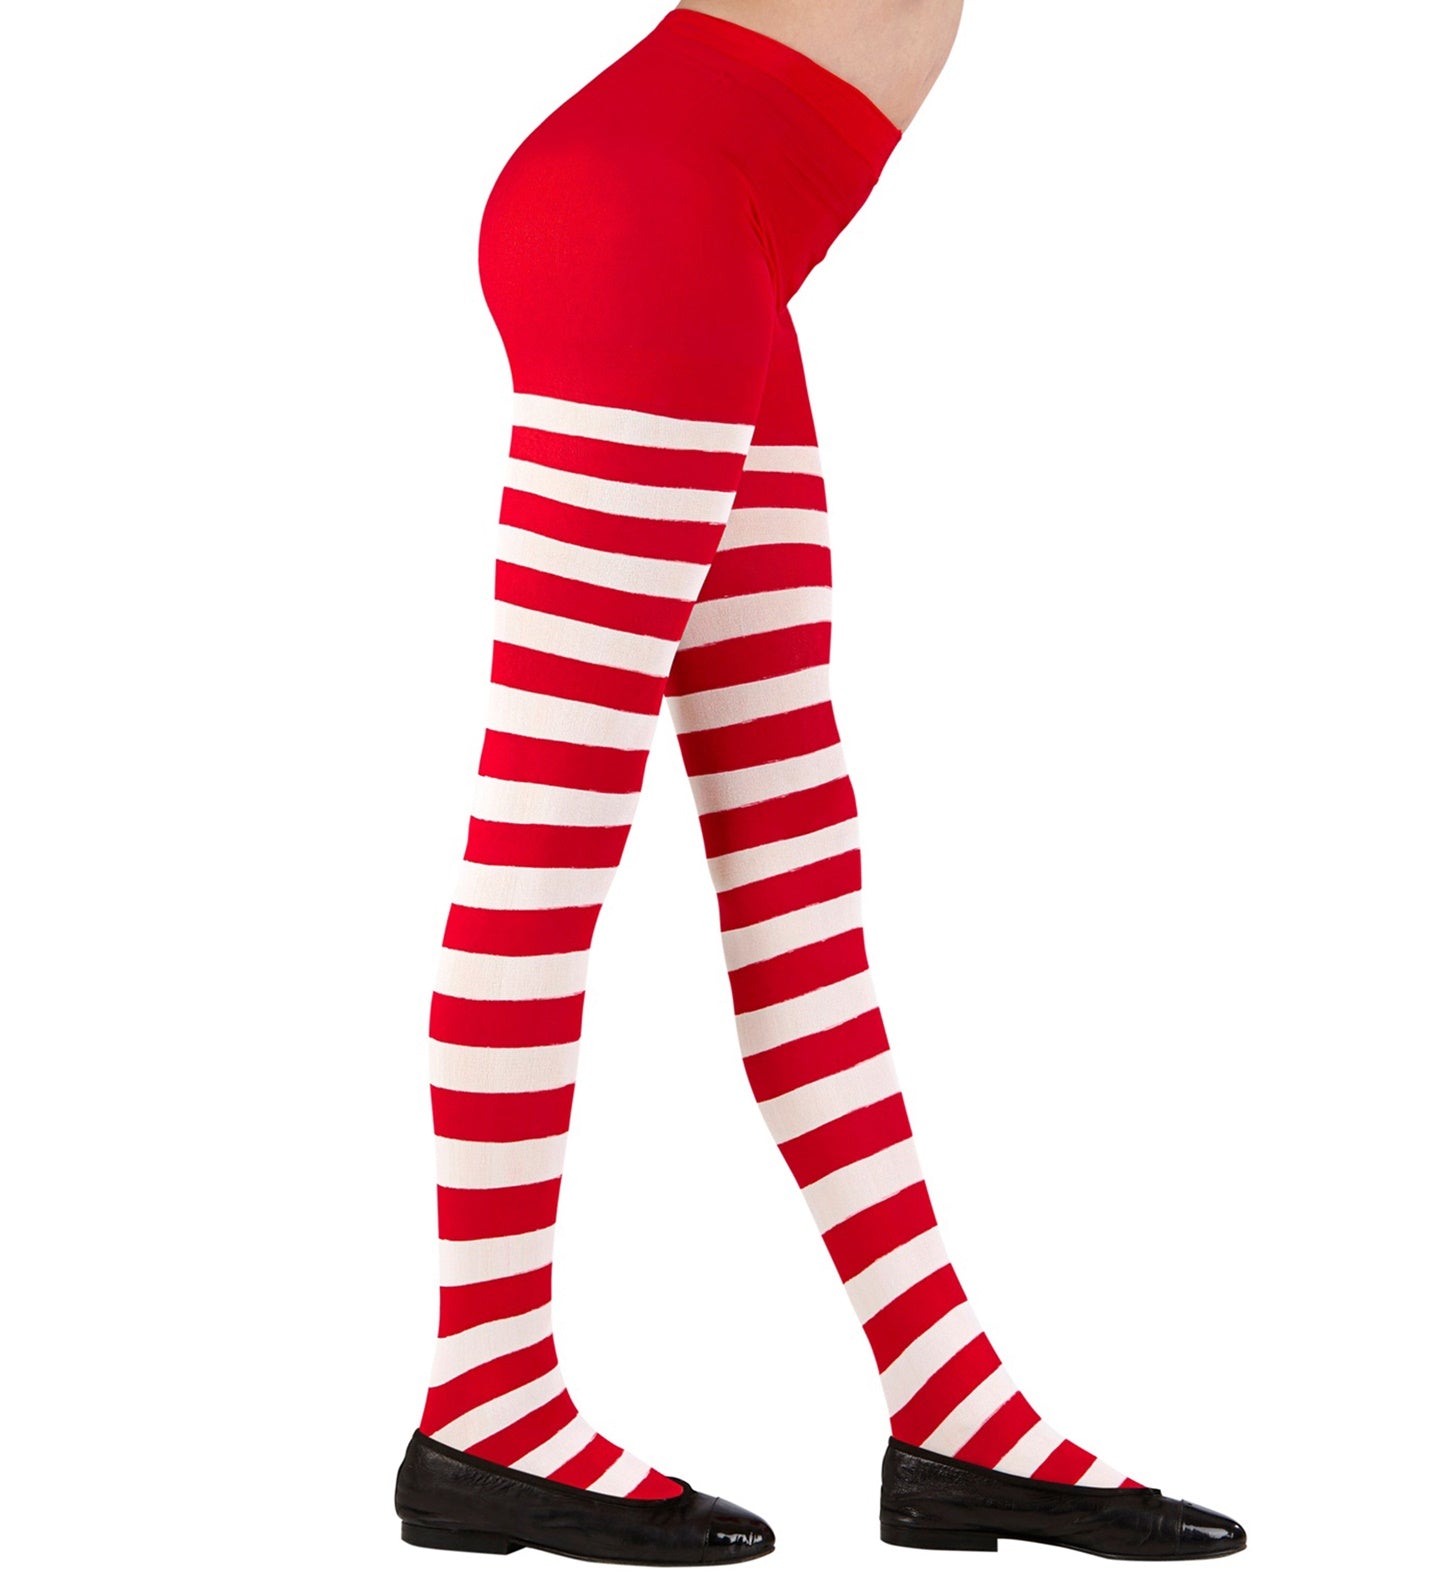 Children's Red and White Striped Tights